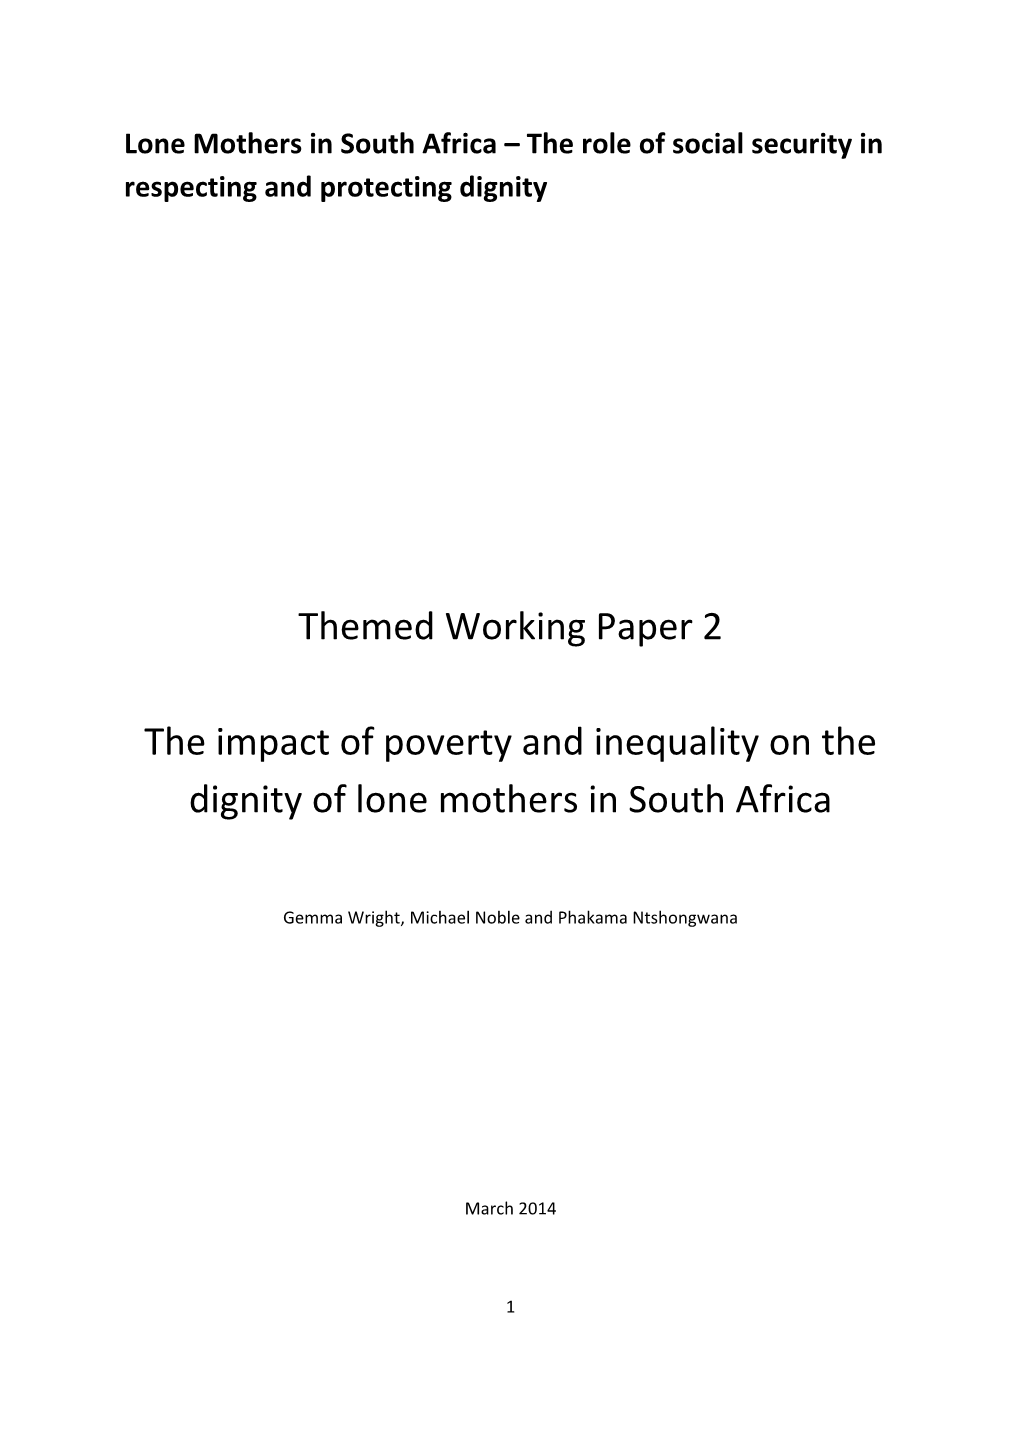 Themed Working Paper 2 the Impact of Poverty and Inequality on The